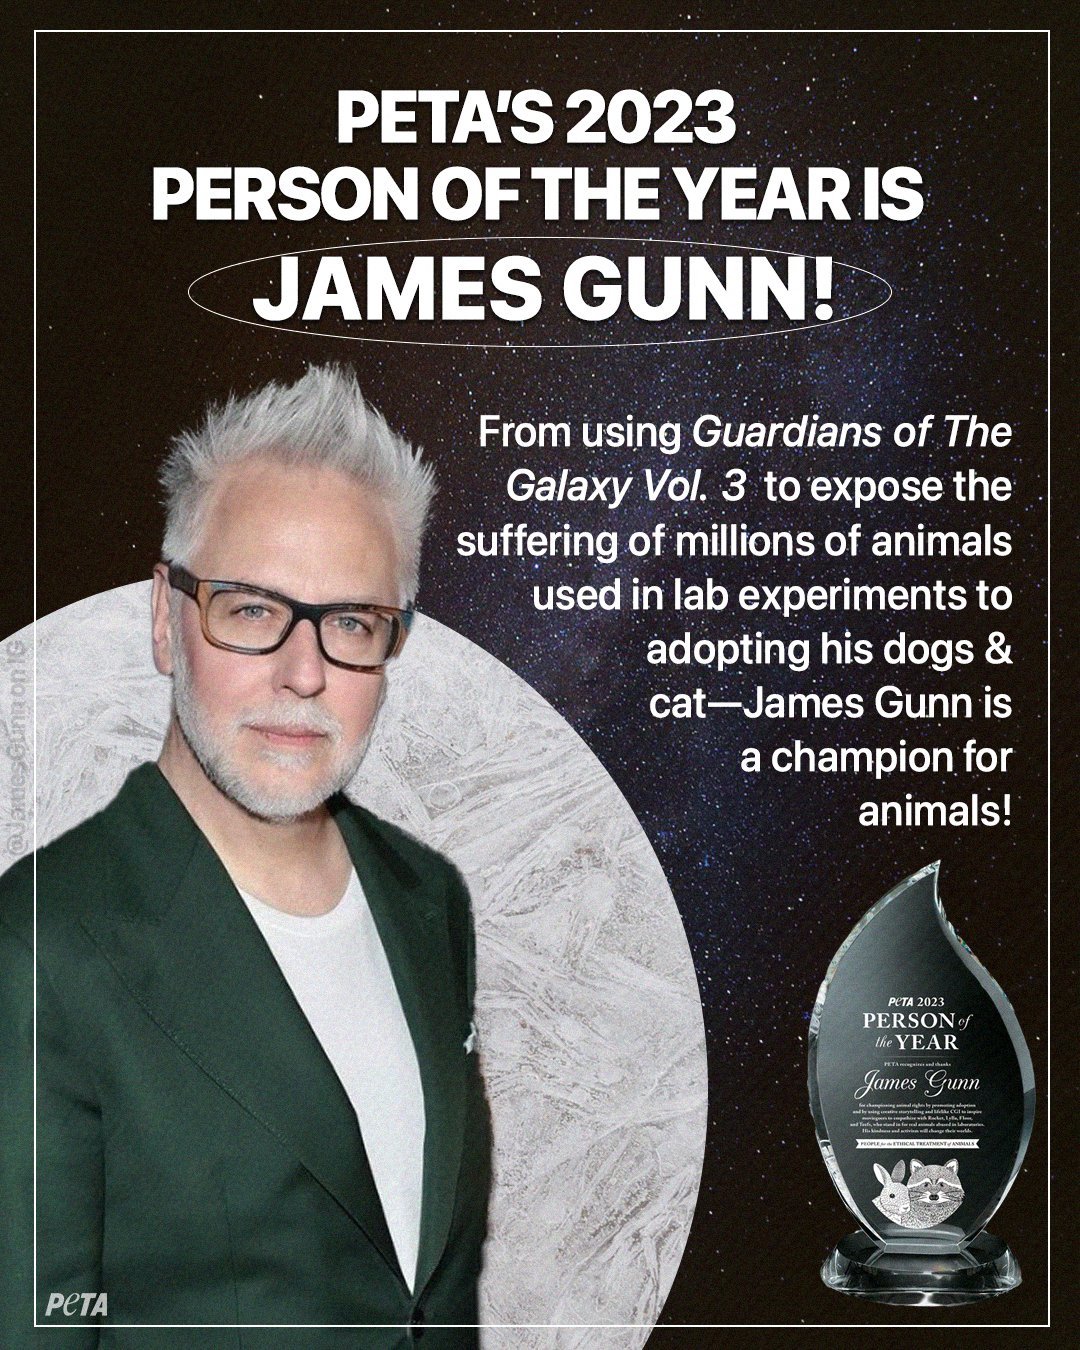 PETA has named James Gunn its Person of the Year